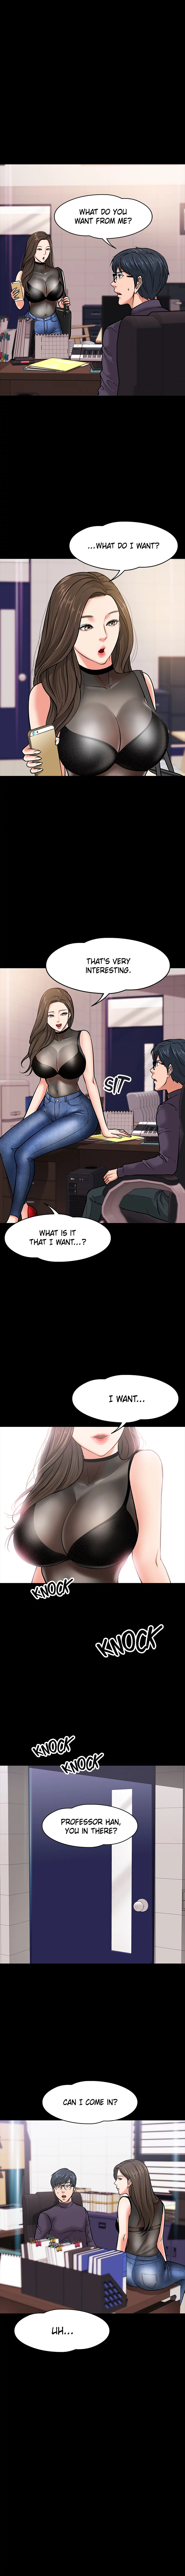 Are You Just Going To Watch? - Chapter 4 Page 7